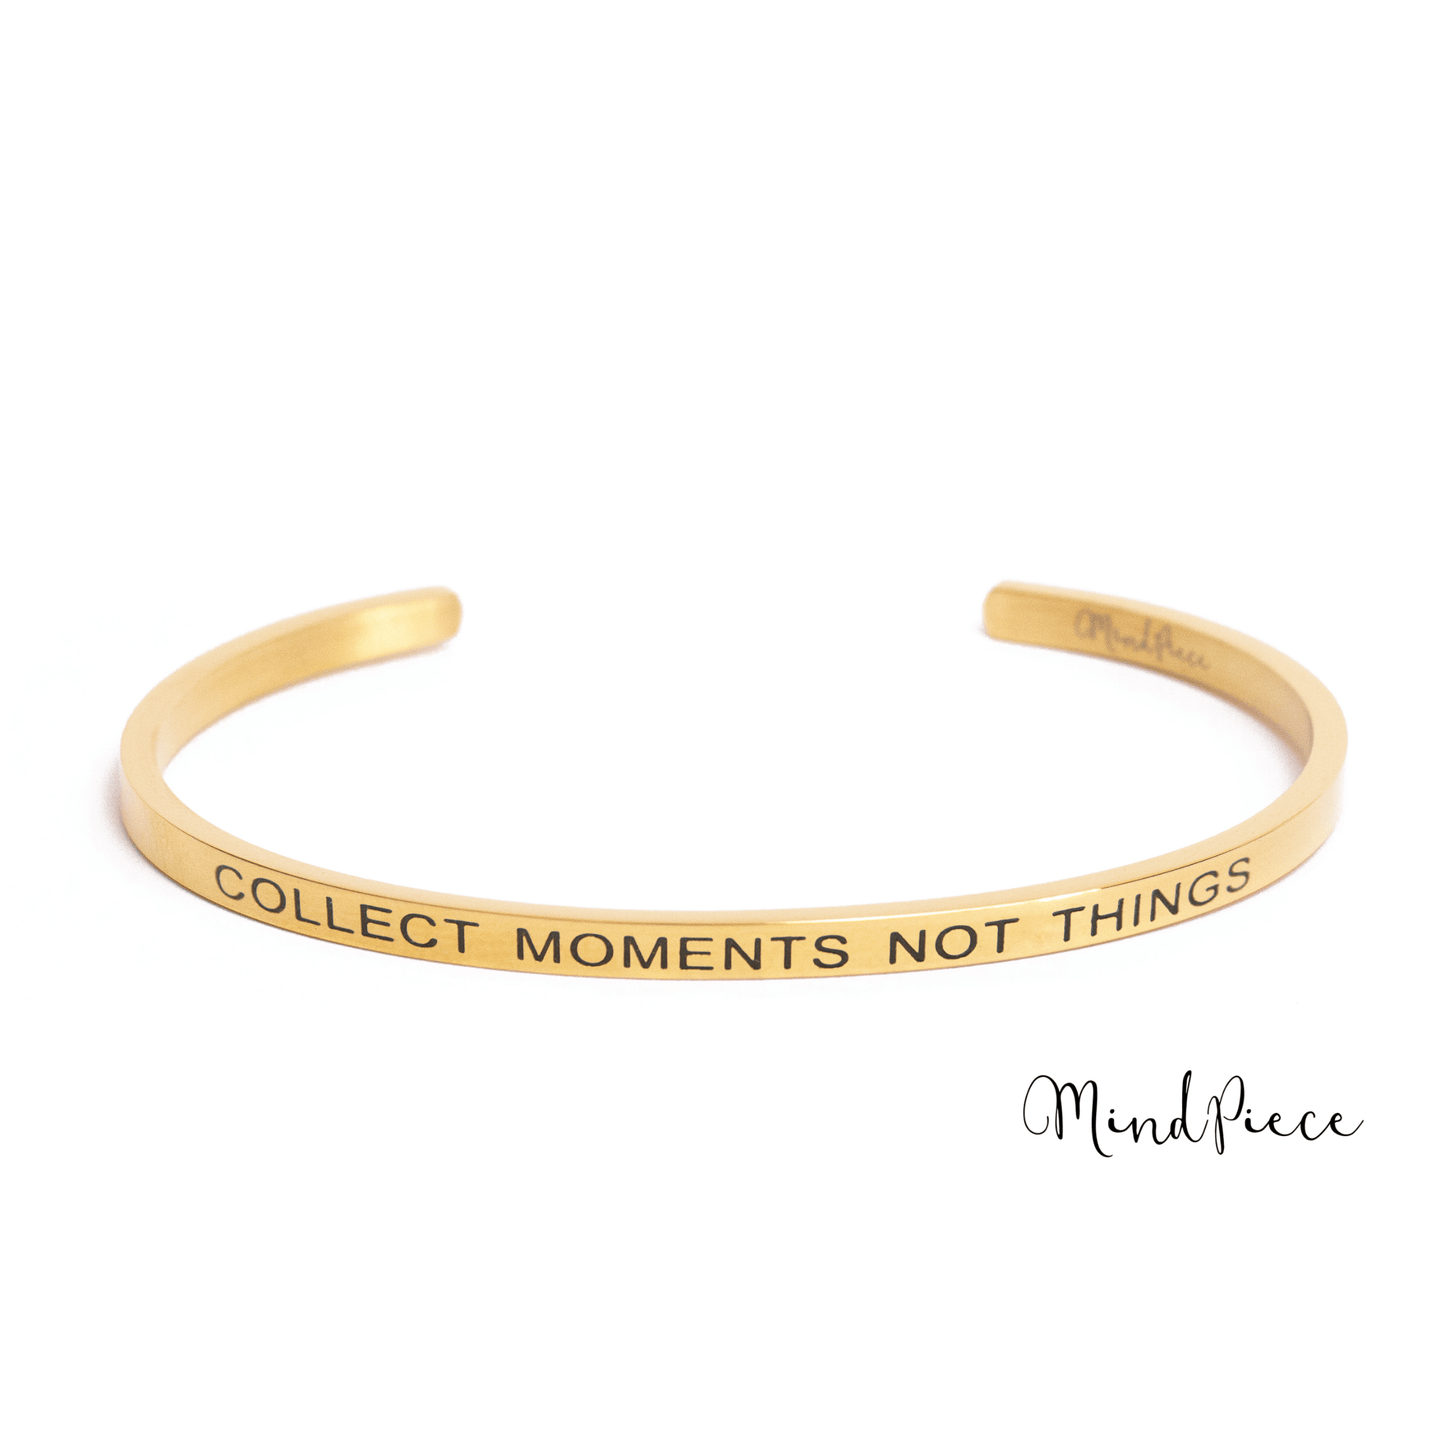 Load image into Gallery viewer, Quote Bracelet - Collect moments not things | silver + rose (1 pcs)
